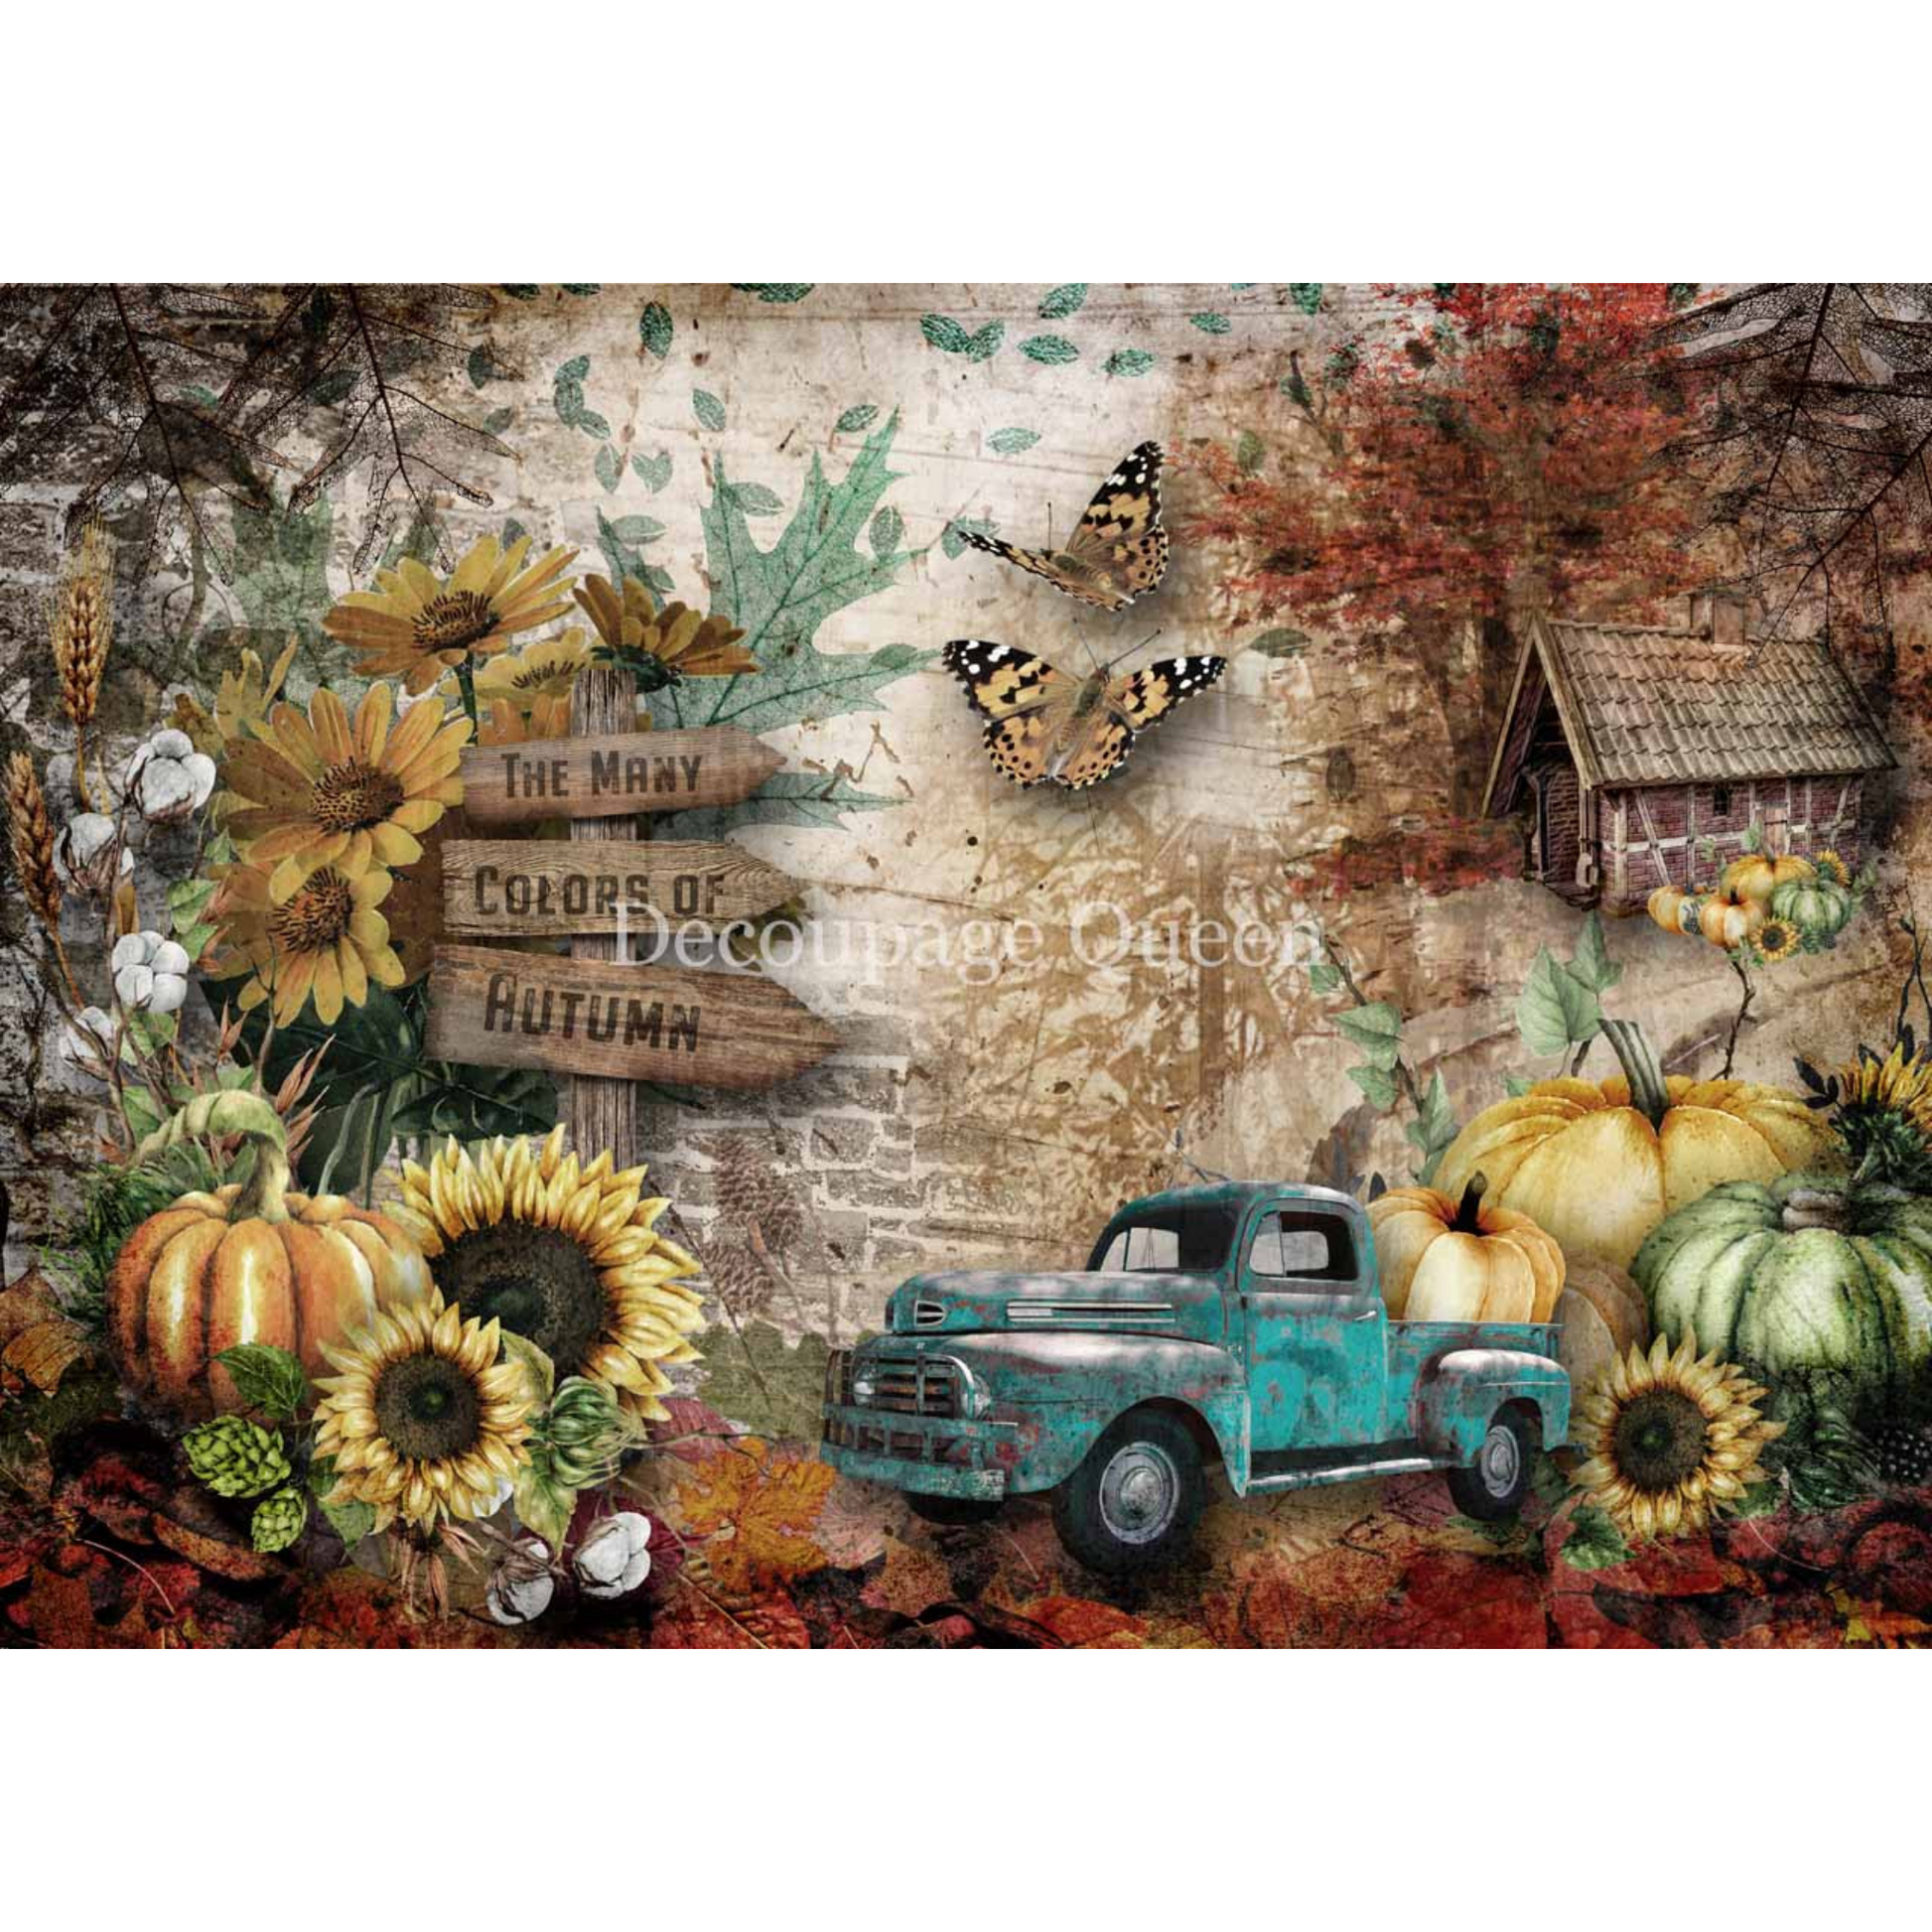 "Autumn Scenes" decoupage rice paper by Decoupage Queen available at Milton's Daughter.